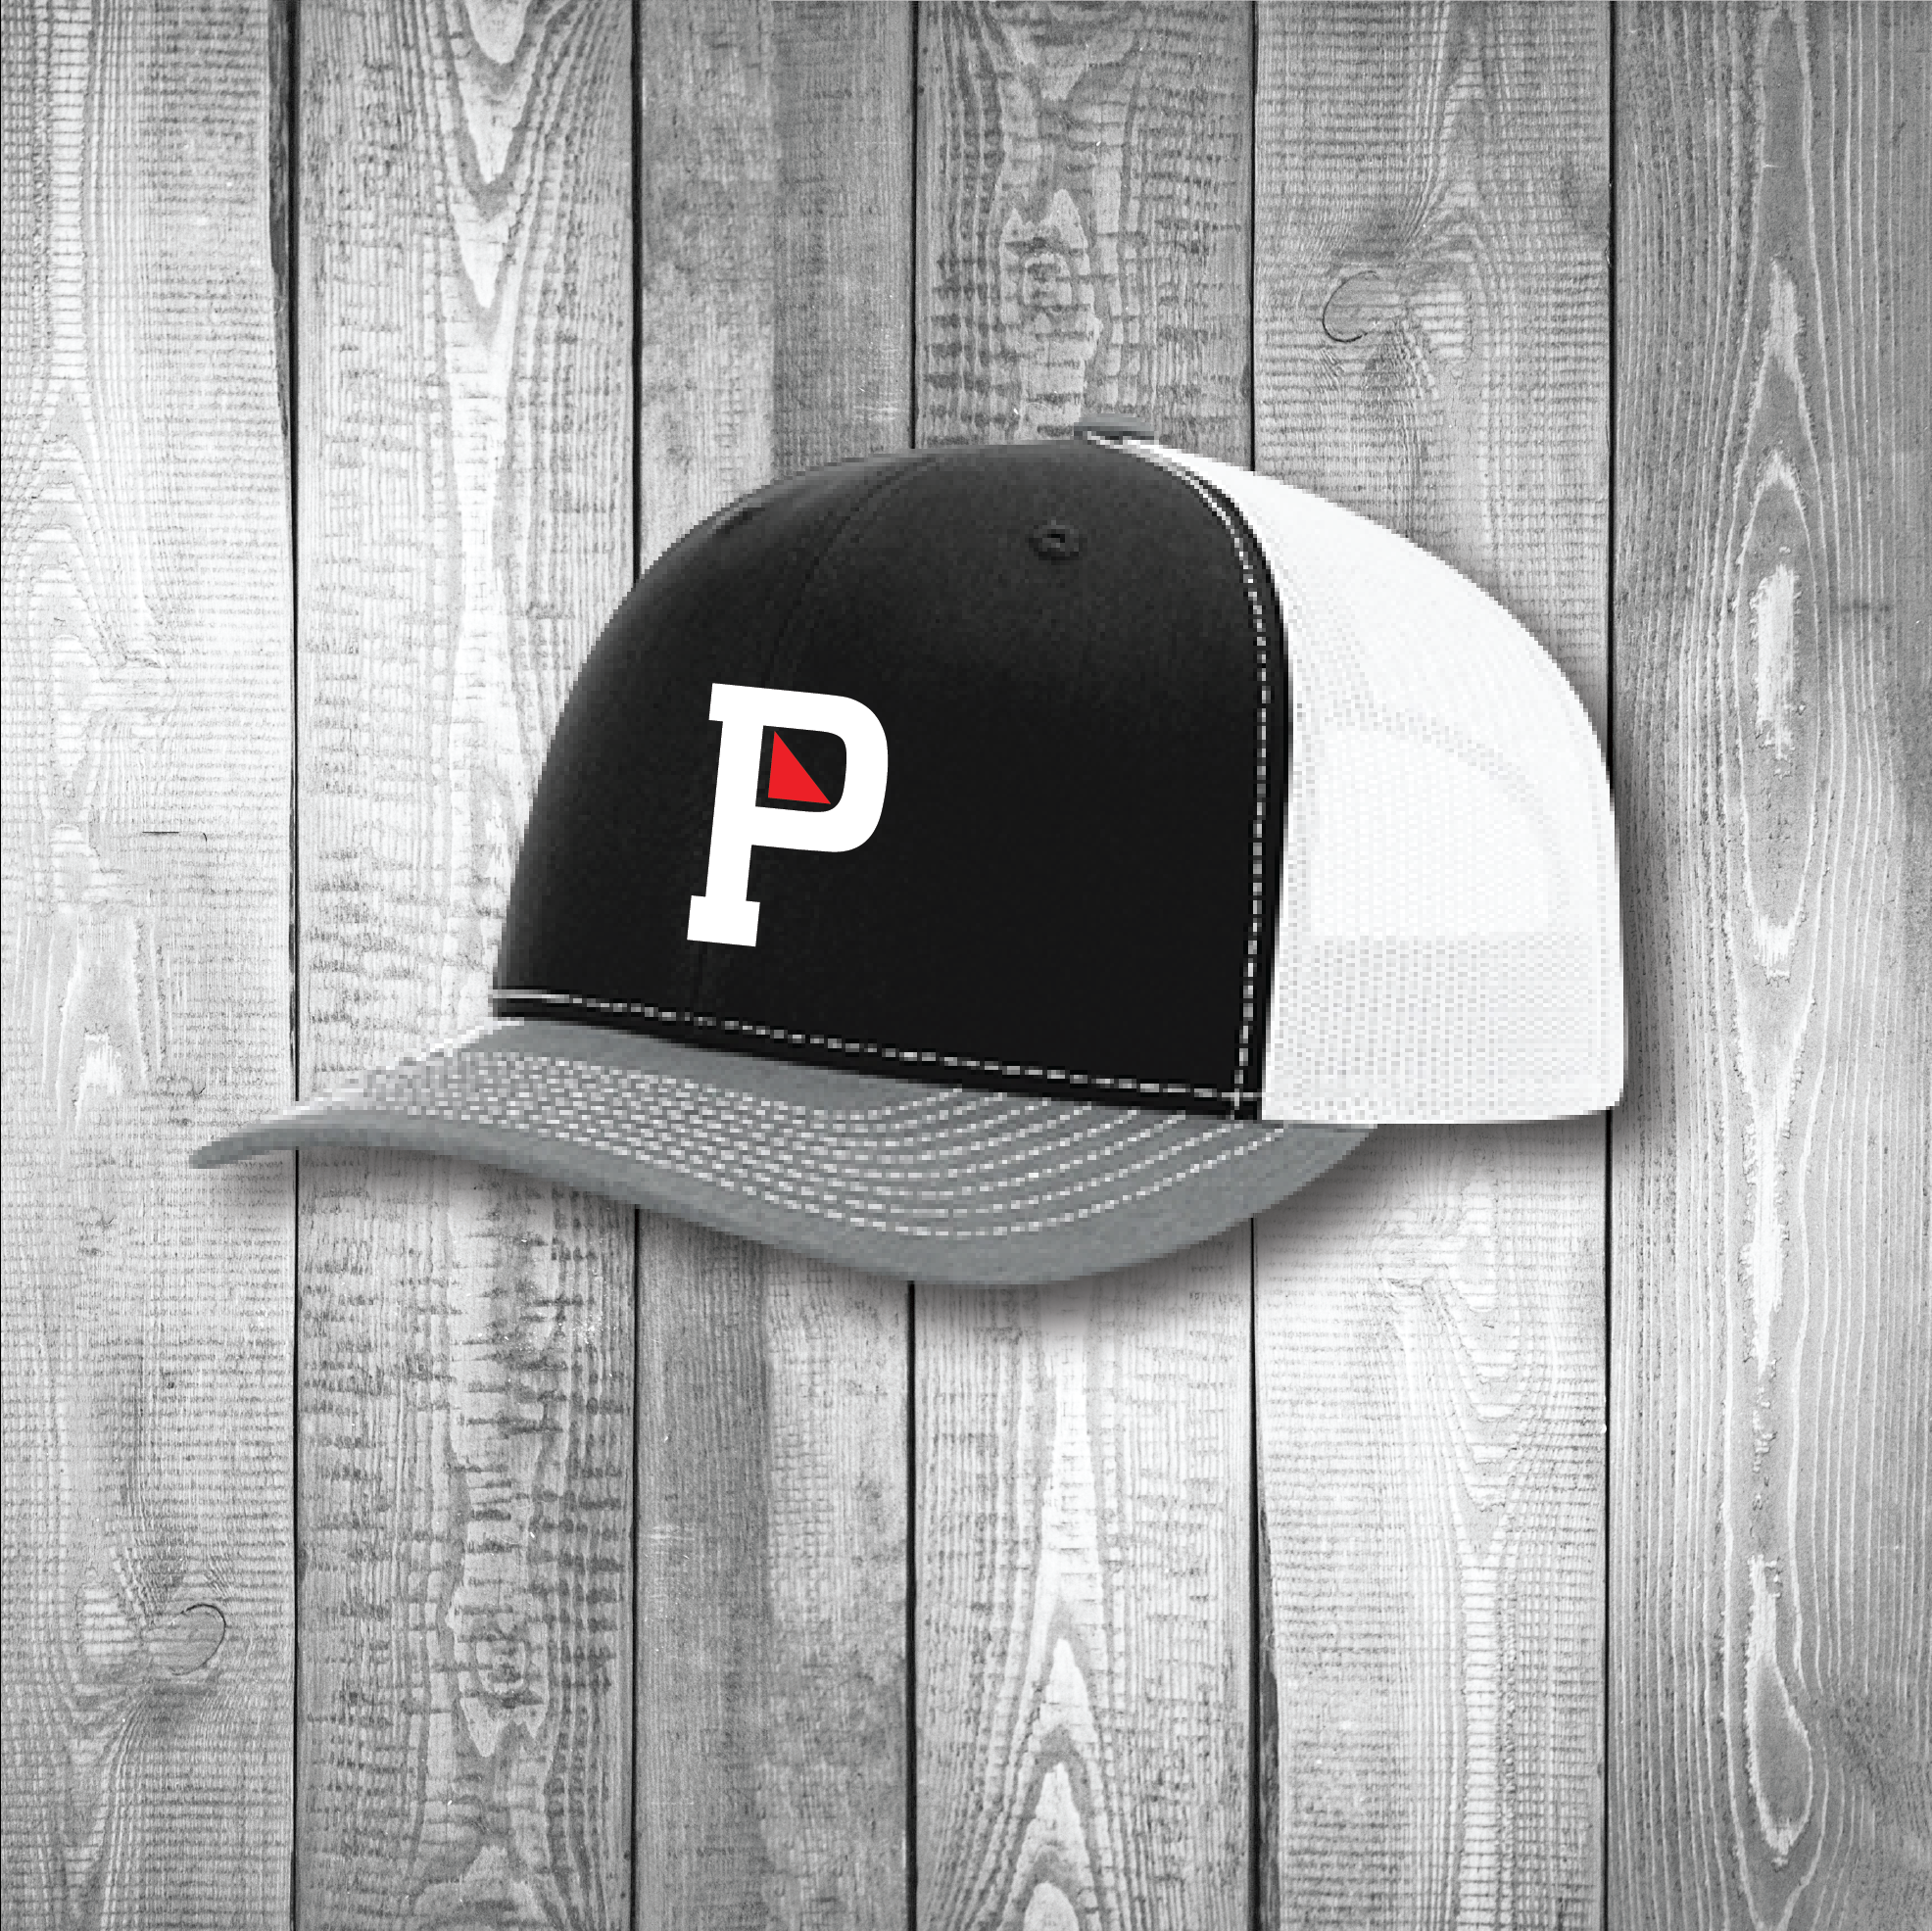 phillies hat png